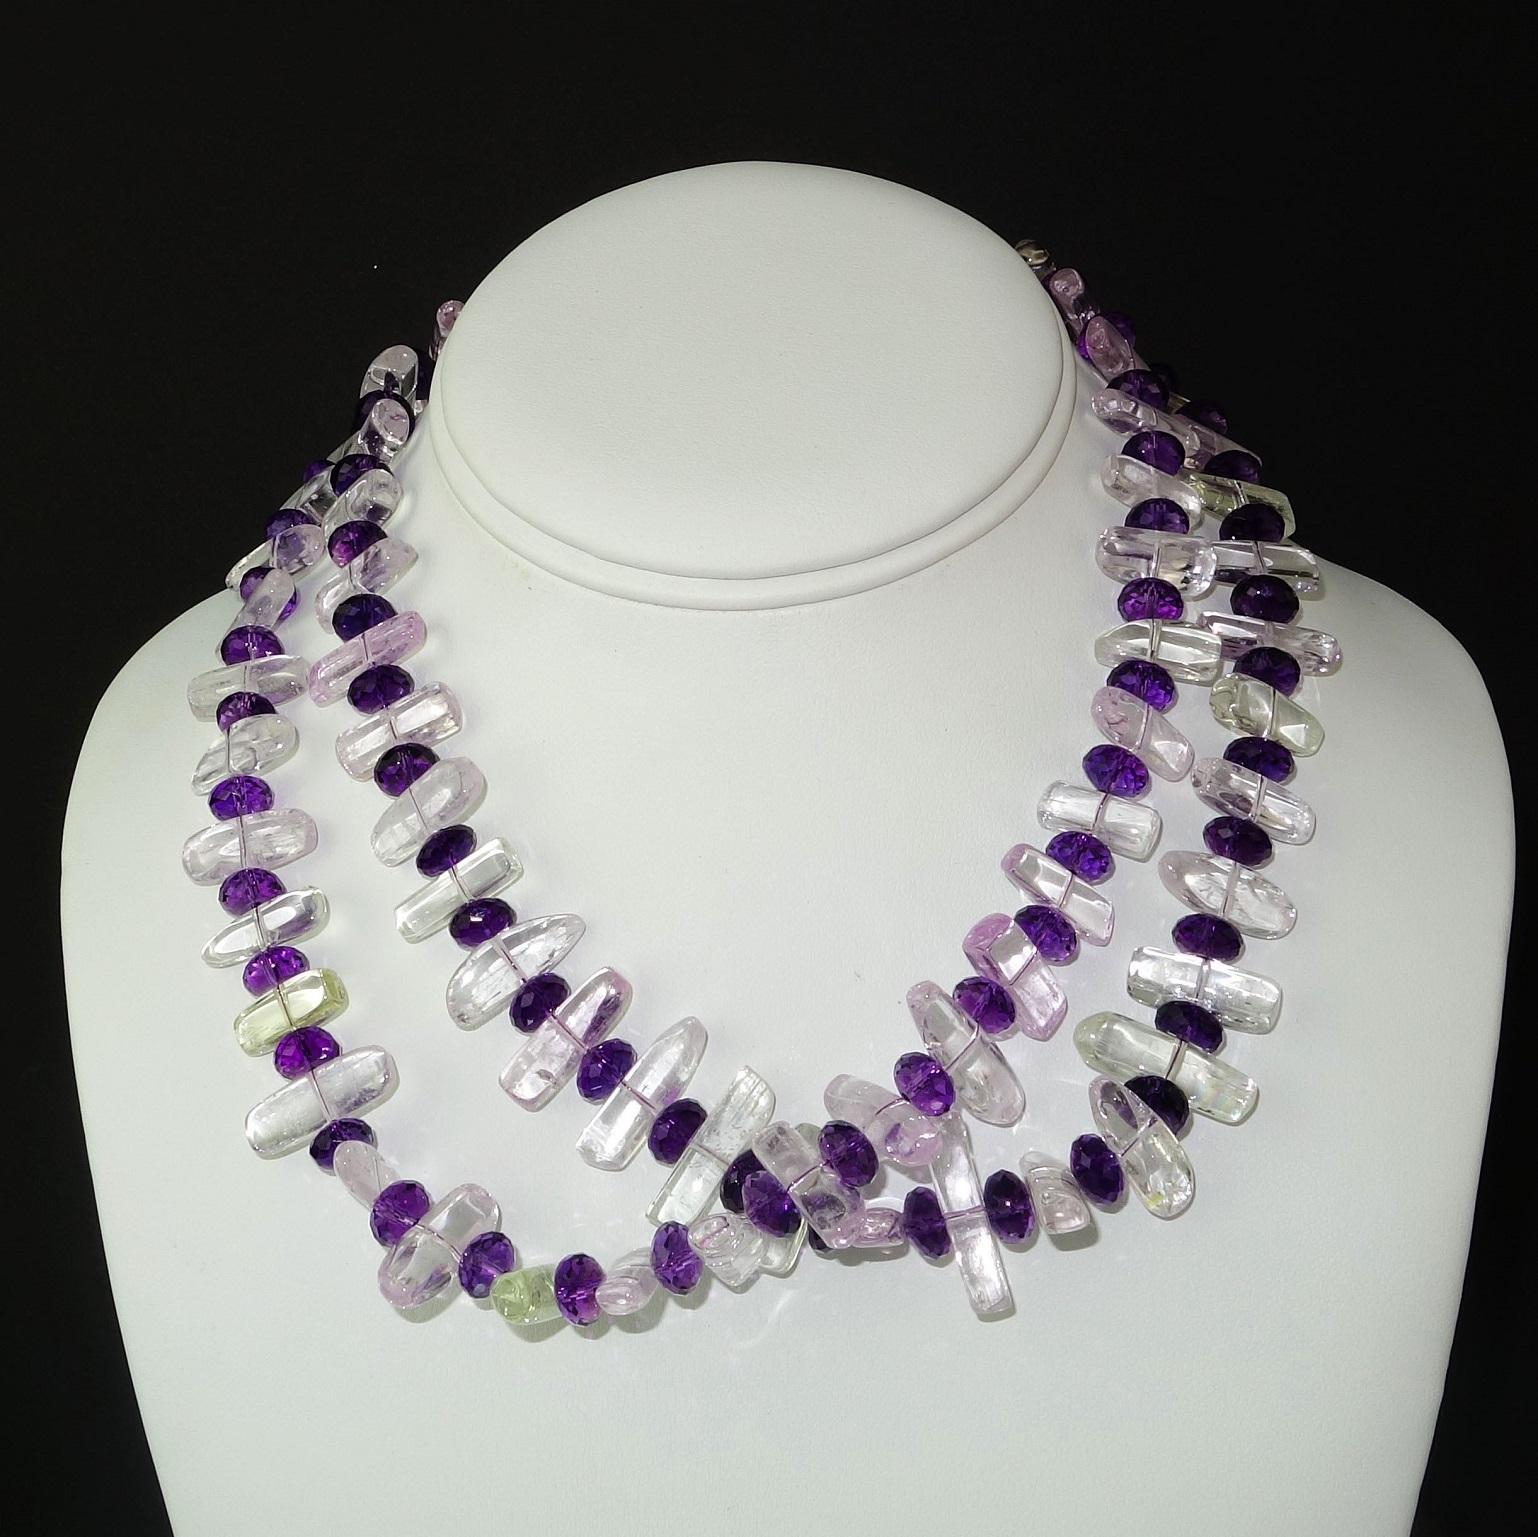 Artisan AJD Double Strand Necklace of Kunzite and Amethyst